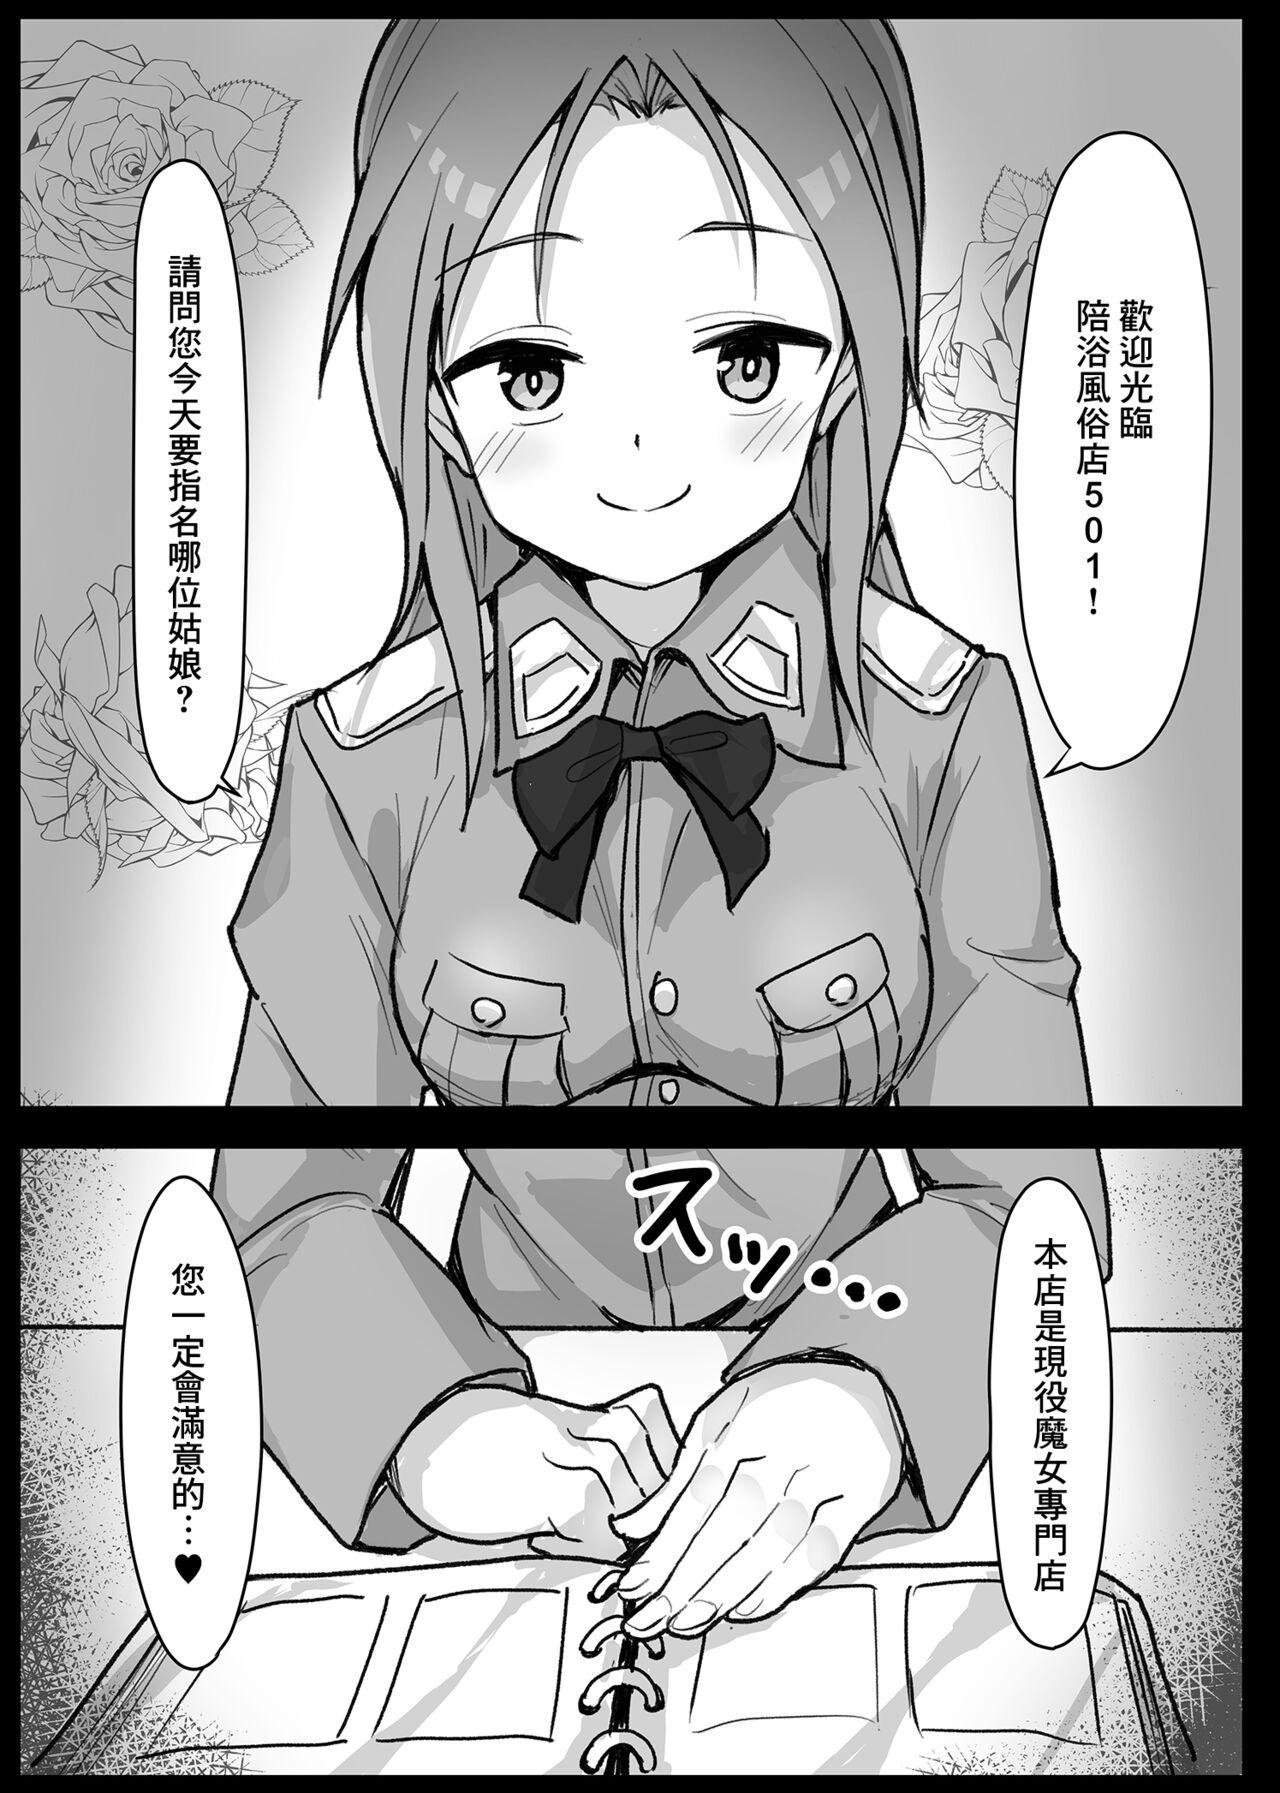 Cosplay Soapland 501 e Youkoso! - Strike witches Bottom - Page 2